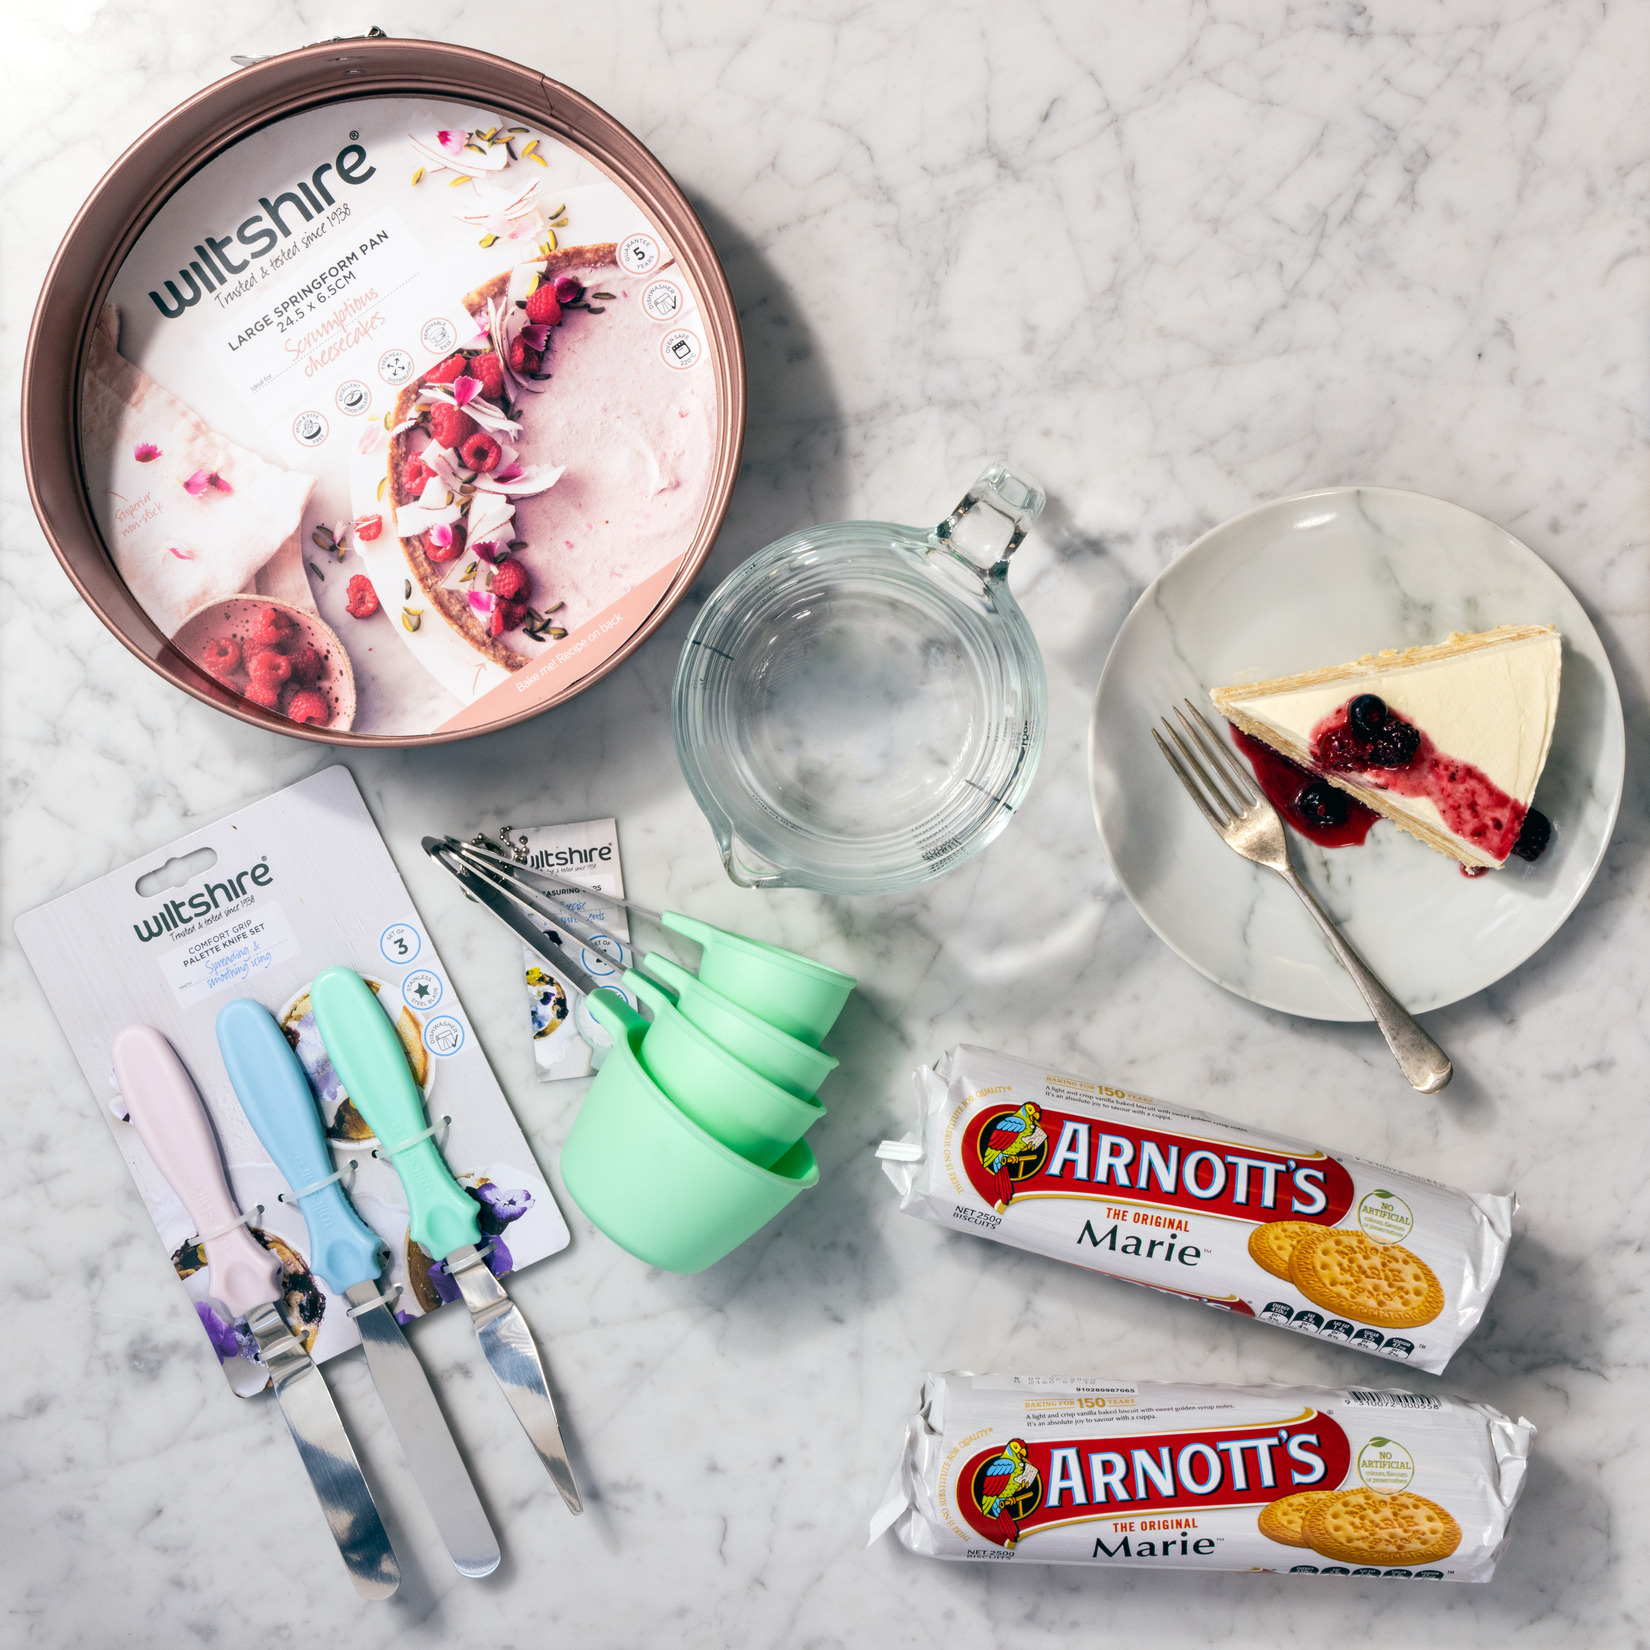 Image of Arnott's Marie Biscuits with Wiltshire Cooking Utensils